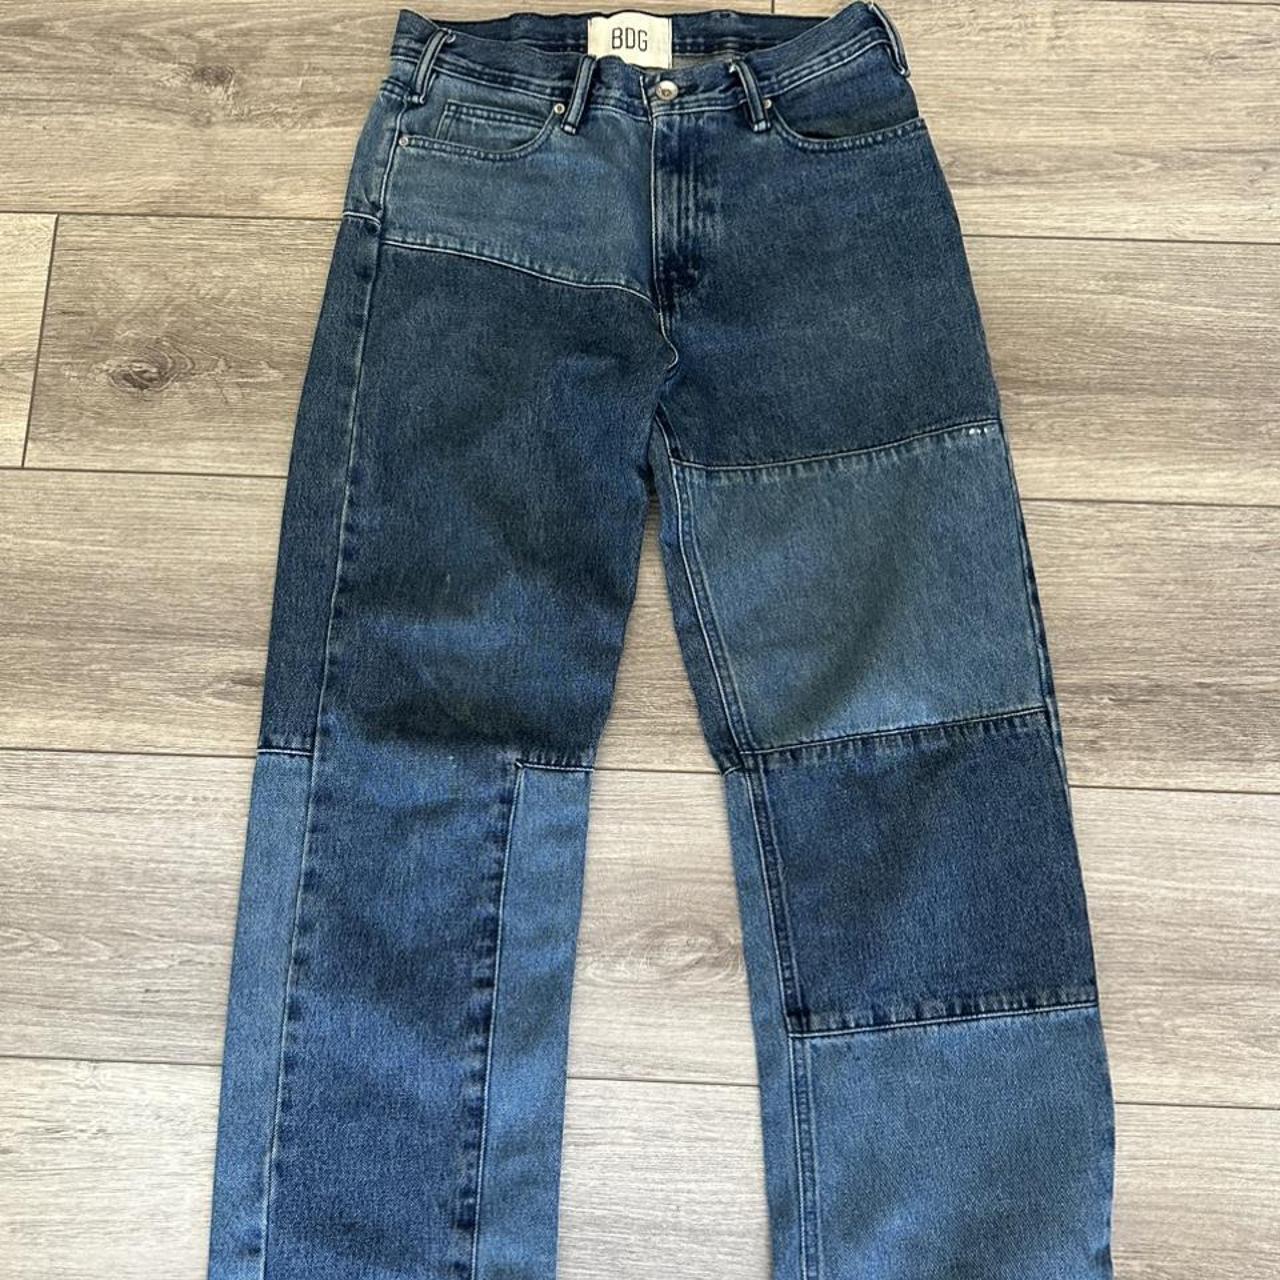 Urban Outfitters BDG Patchwork Jeans Size - M 30x32... - Depop